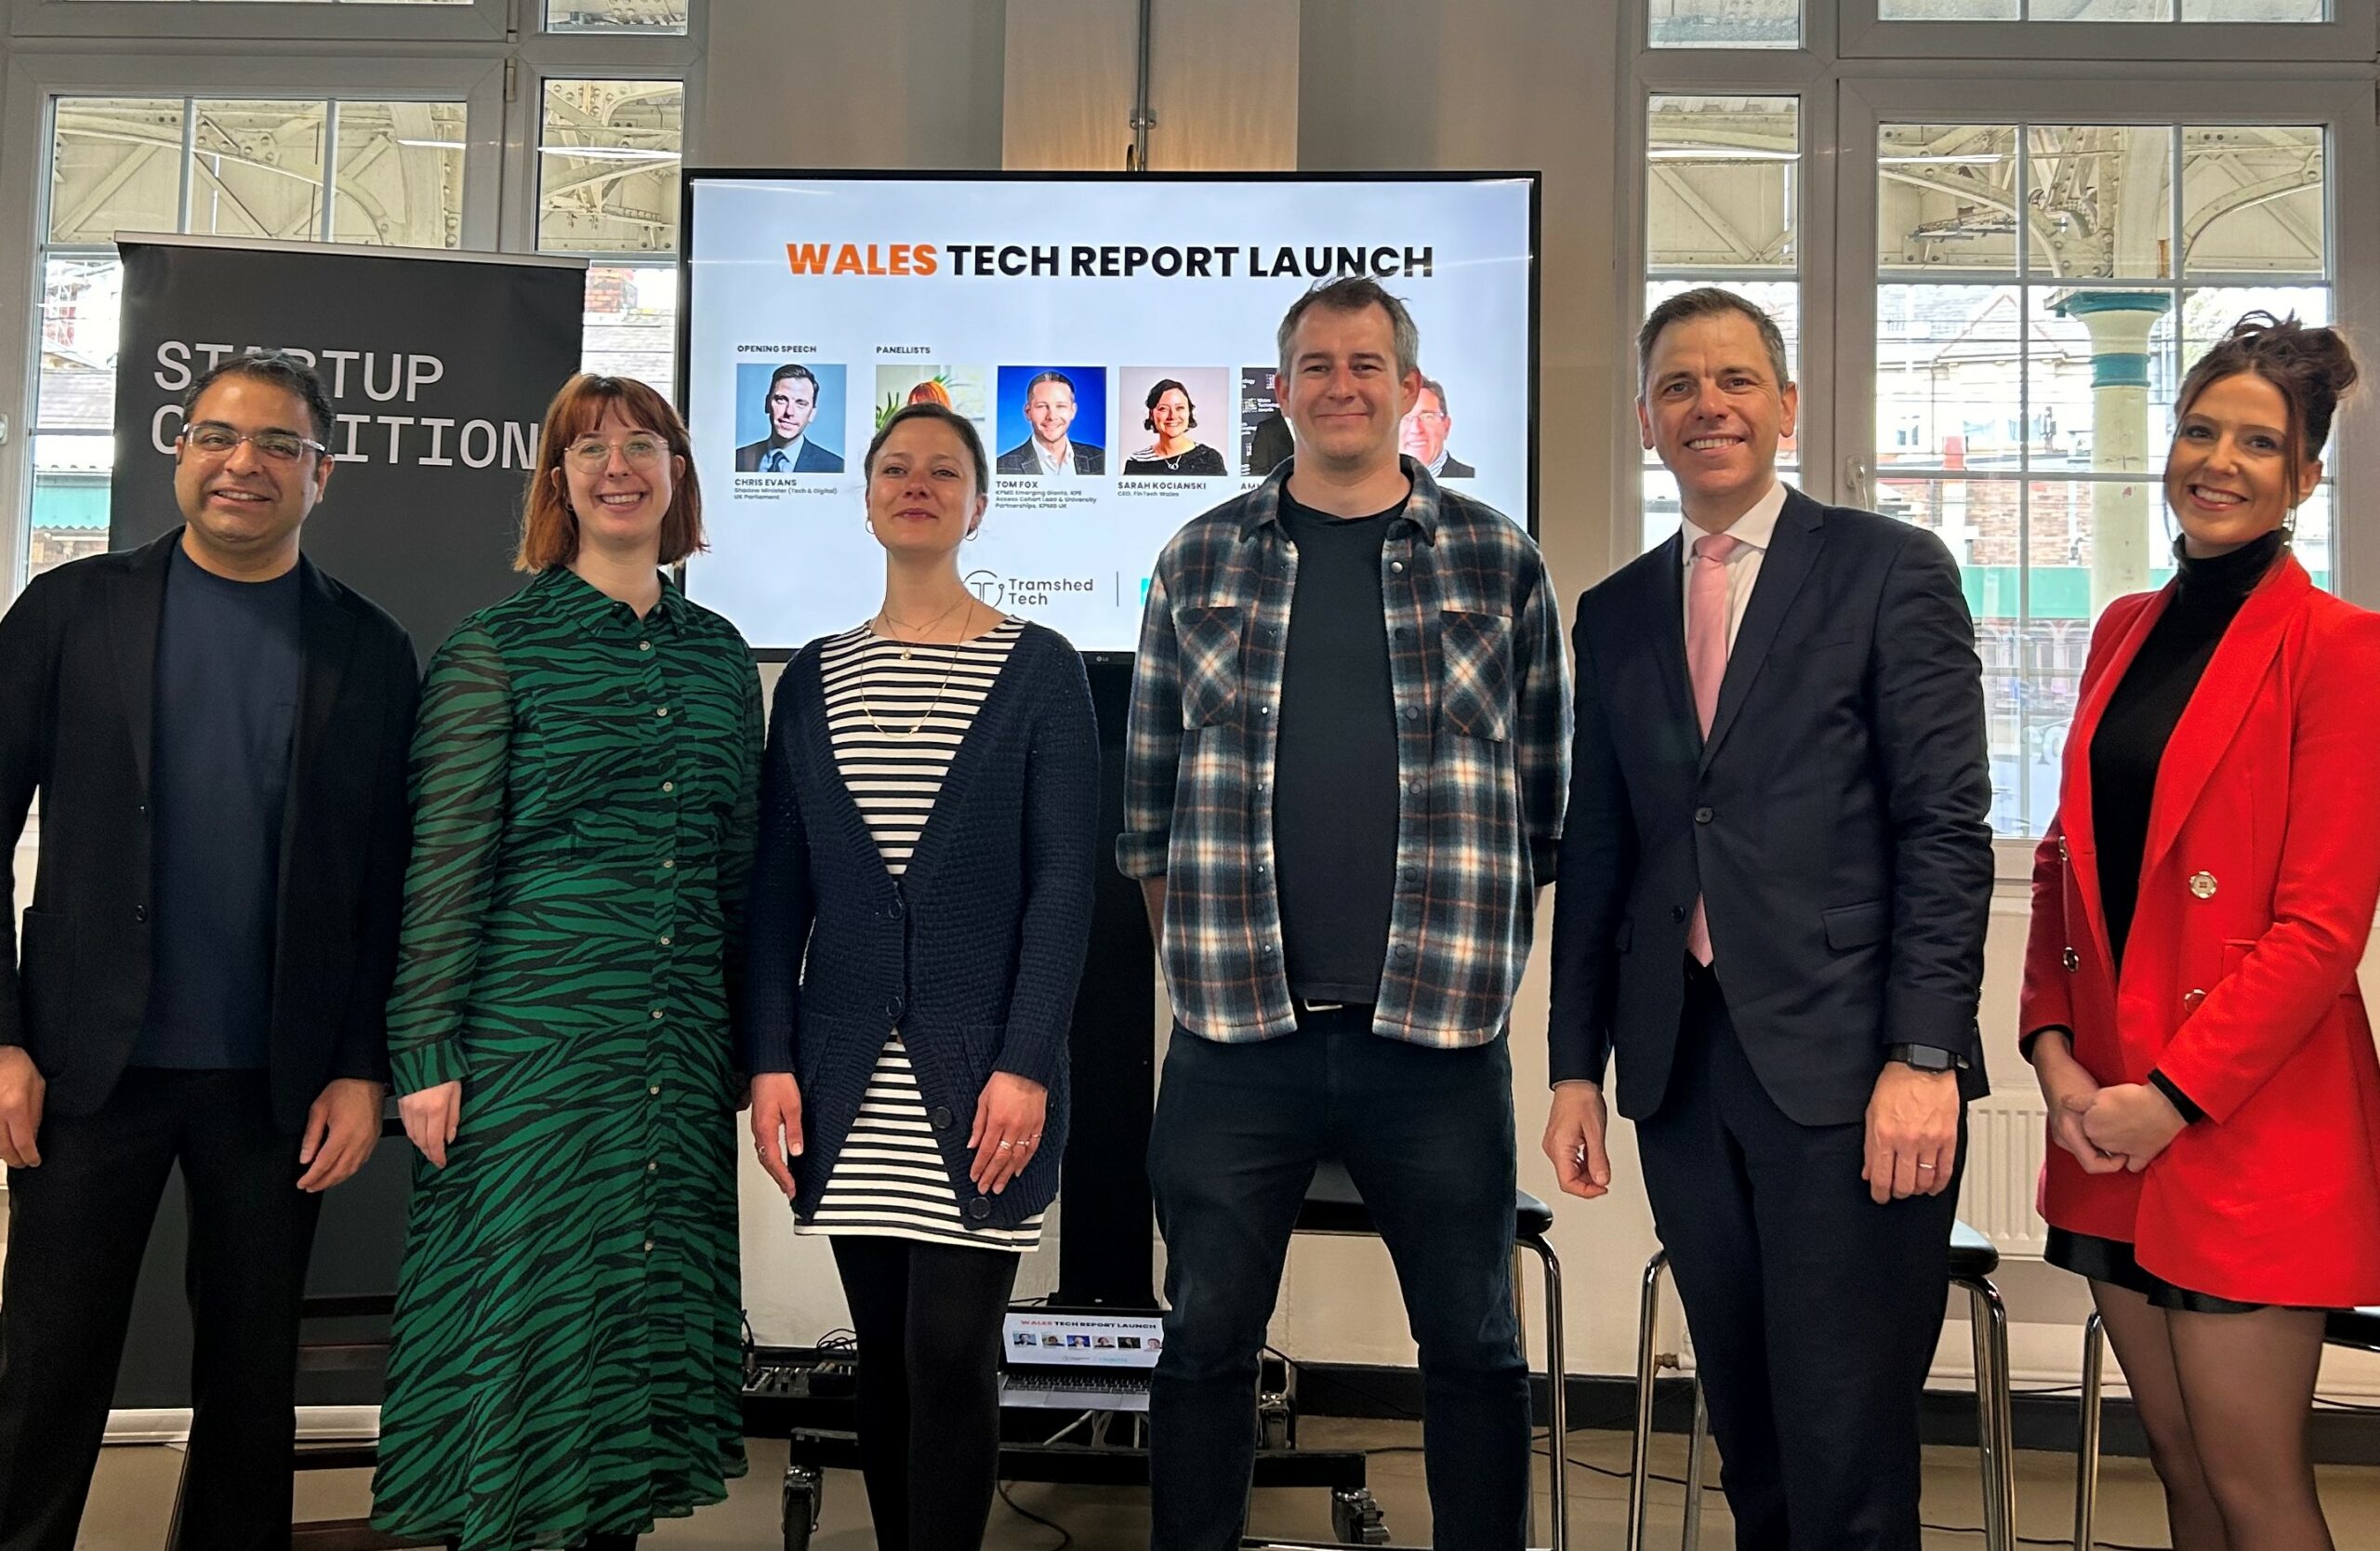 Chris Evans MP stands with a group of tech founders and start-up sector experts.